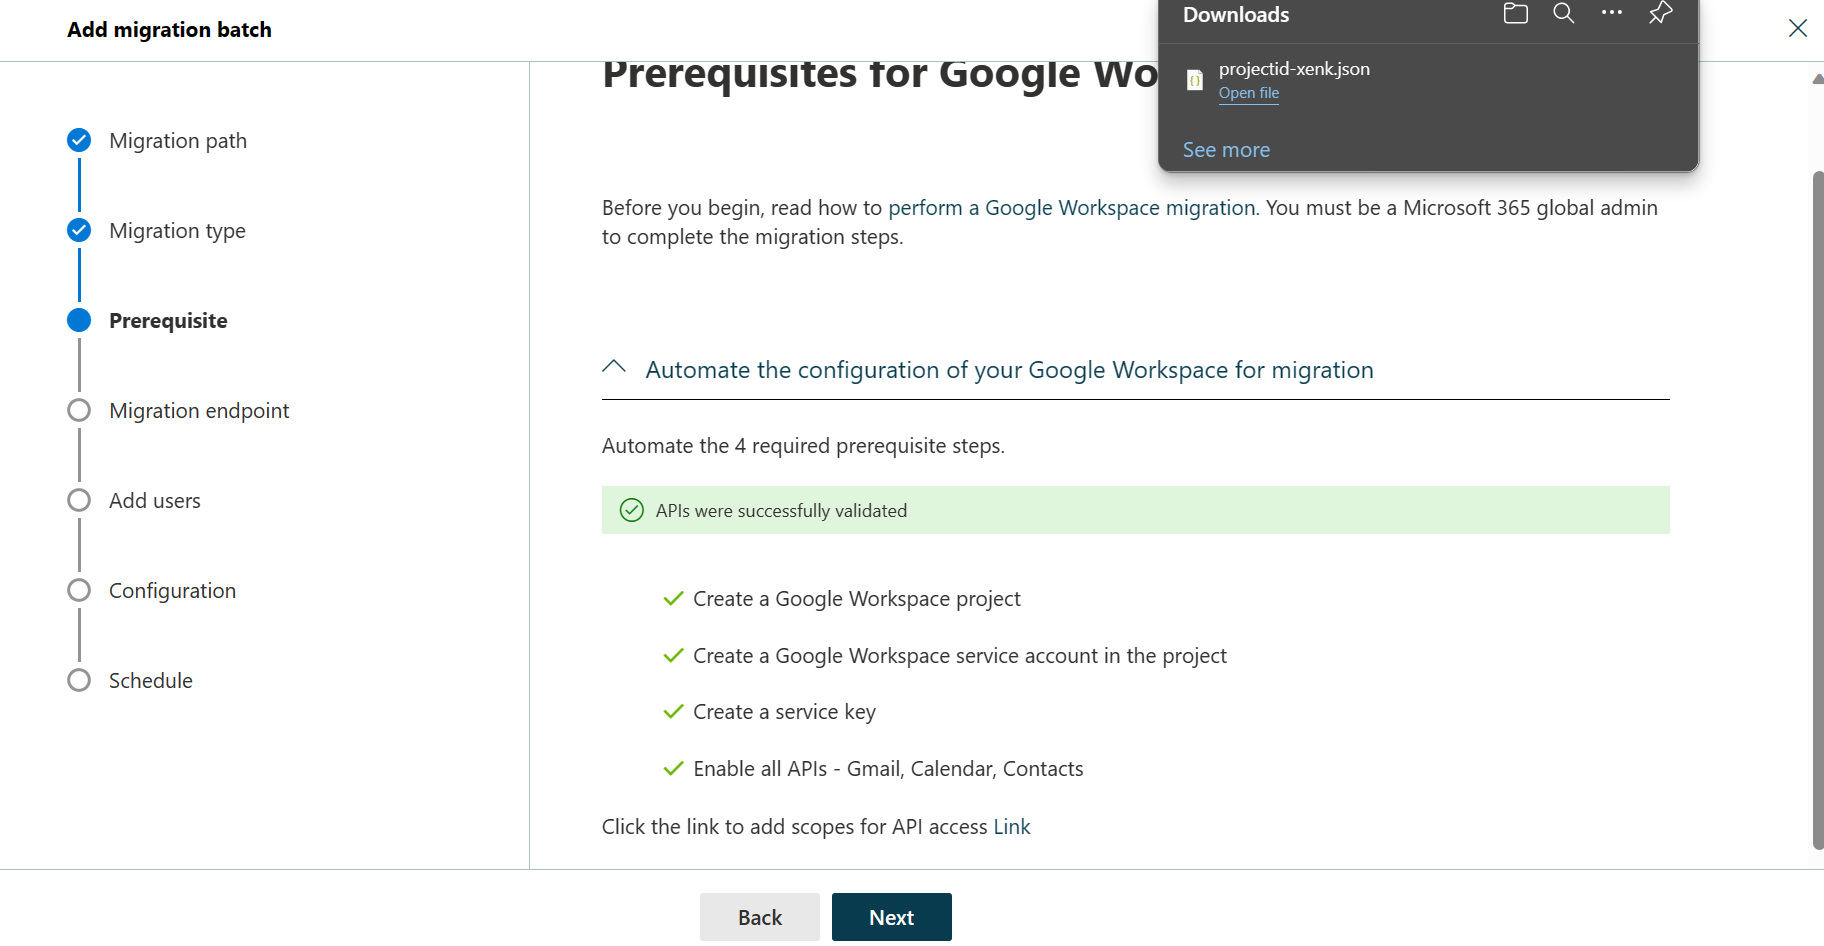 Screenshot of the Prerequisites for Google Workspace Migration dialog that shows checkmarks for all the configuration steps indicating that the automation was successful.